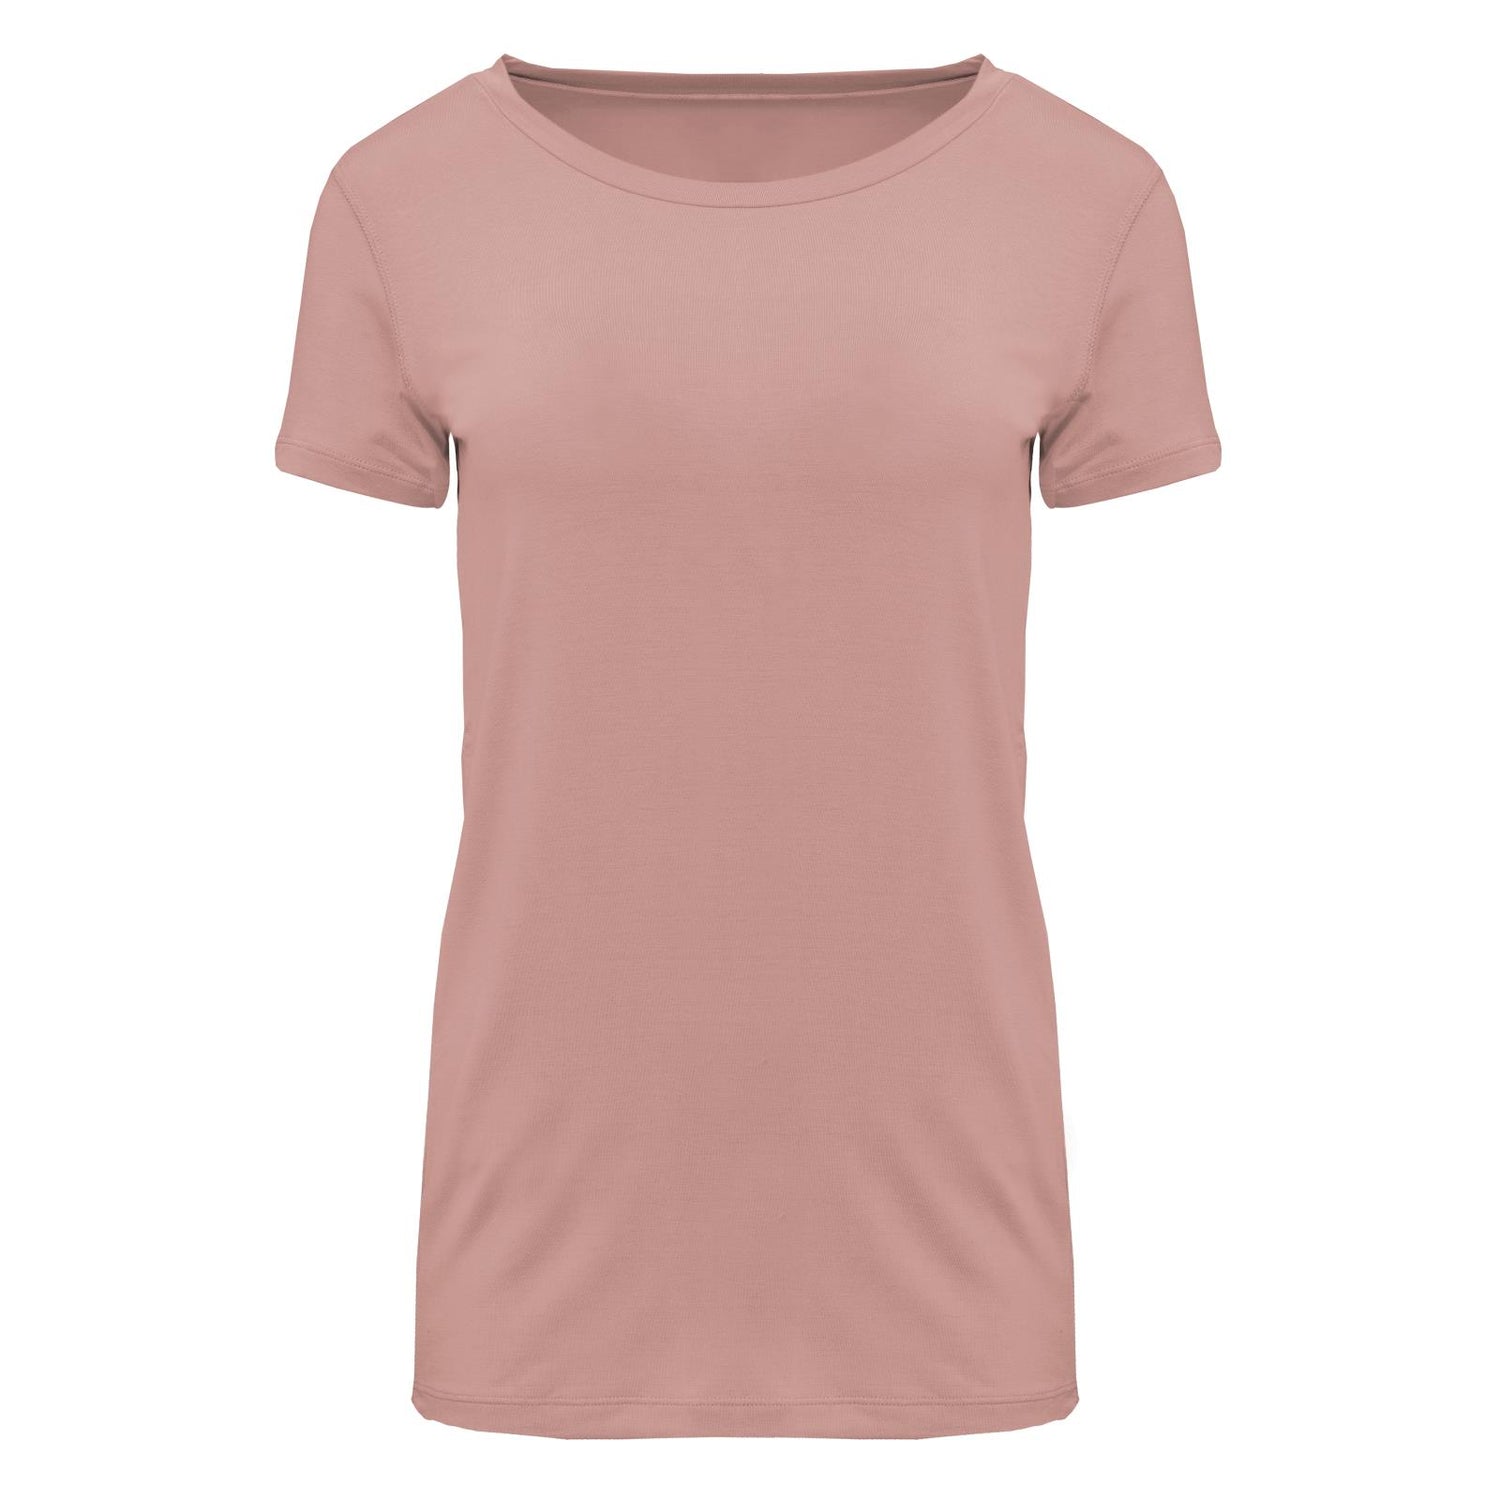 Women's Short Sleeve Relaxed Tee in Blush